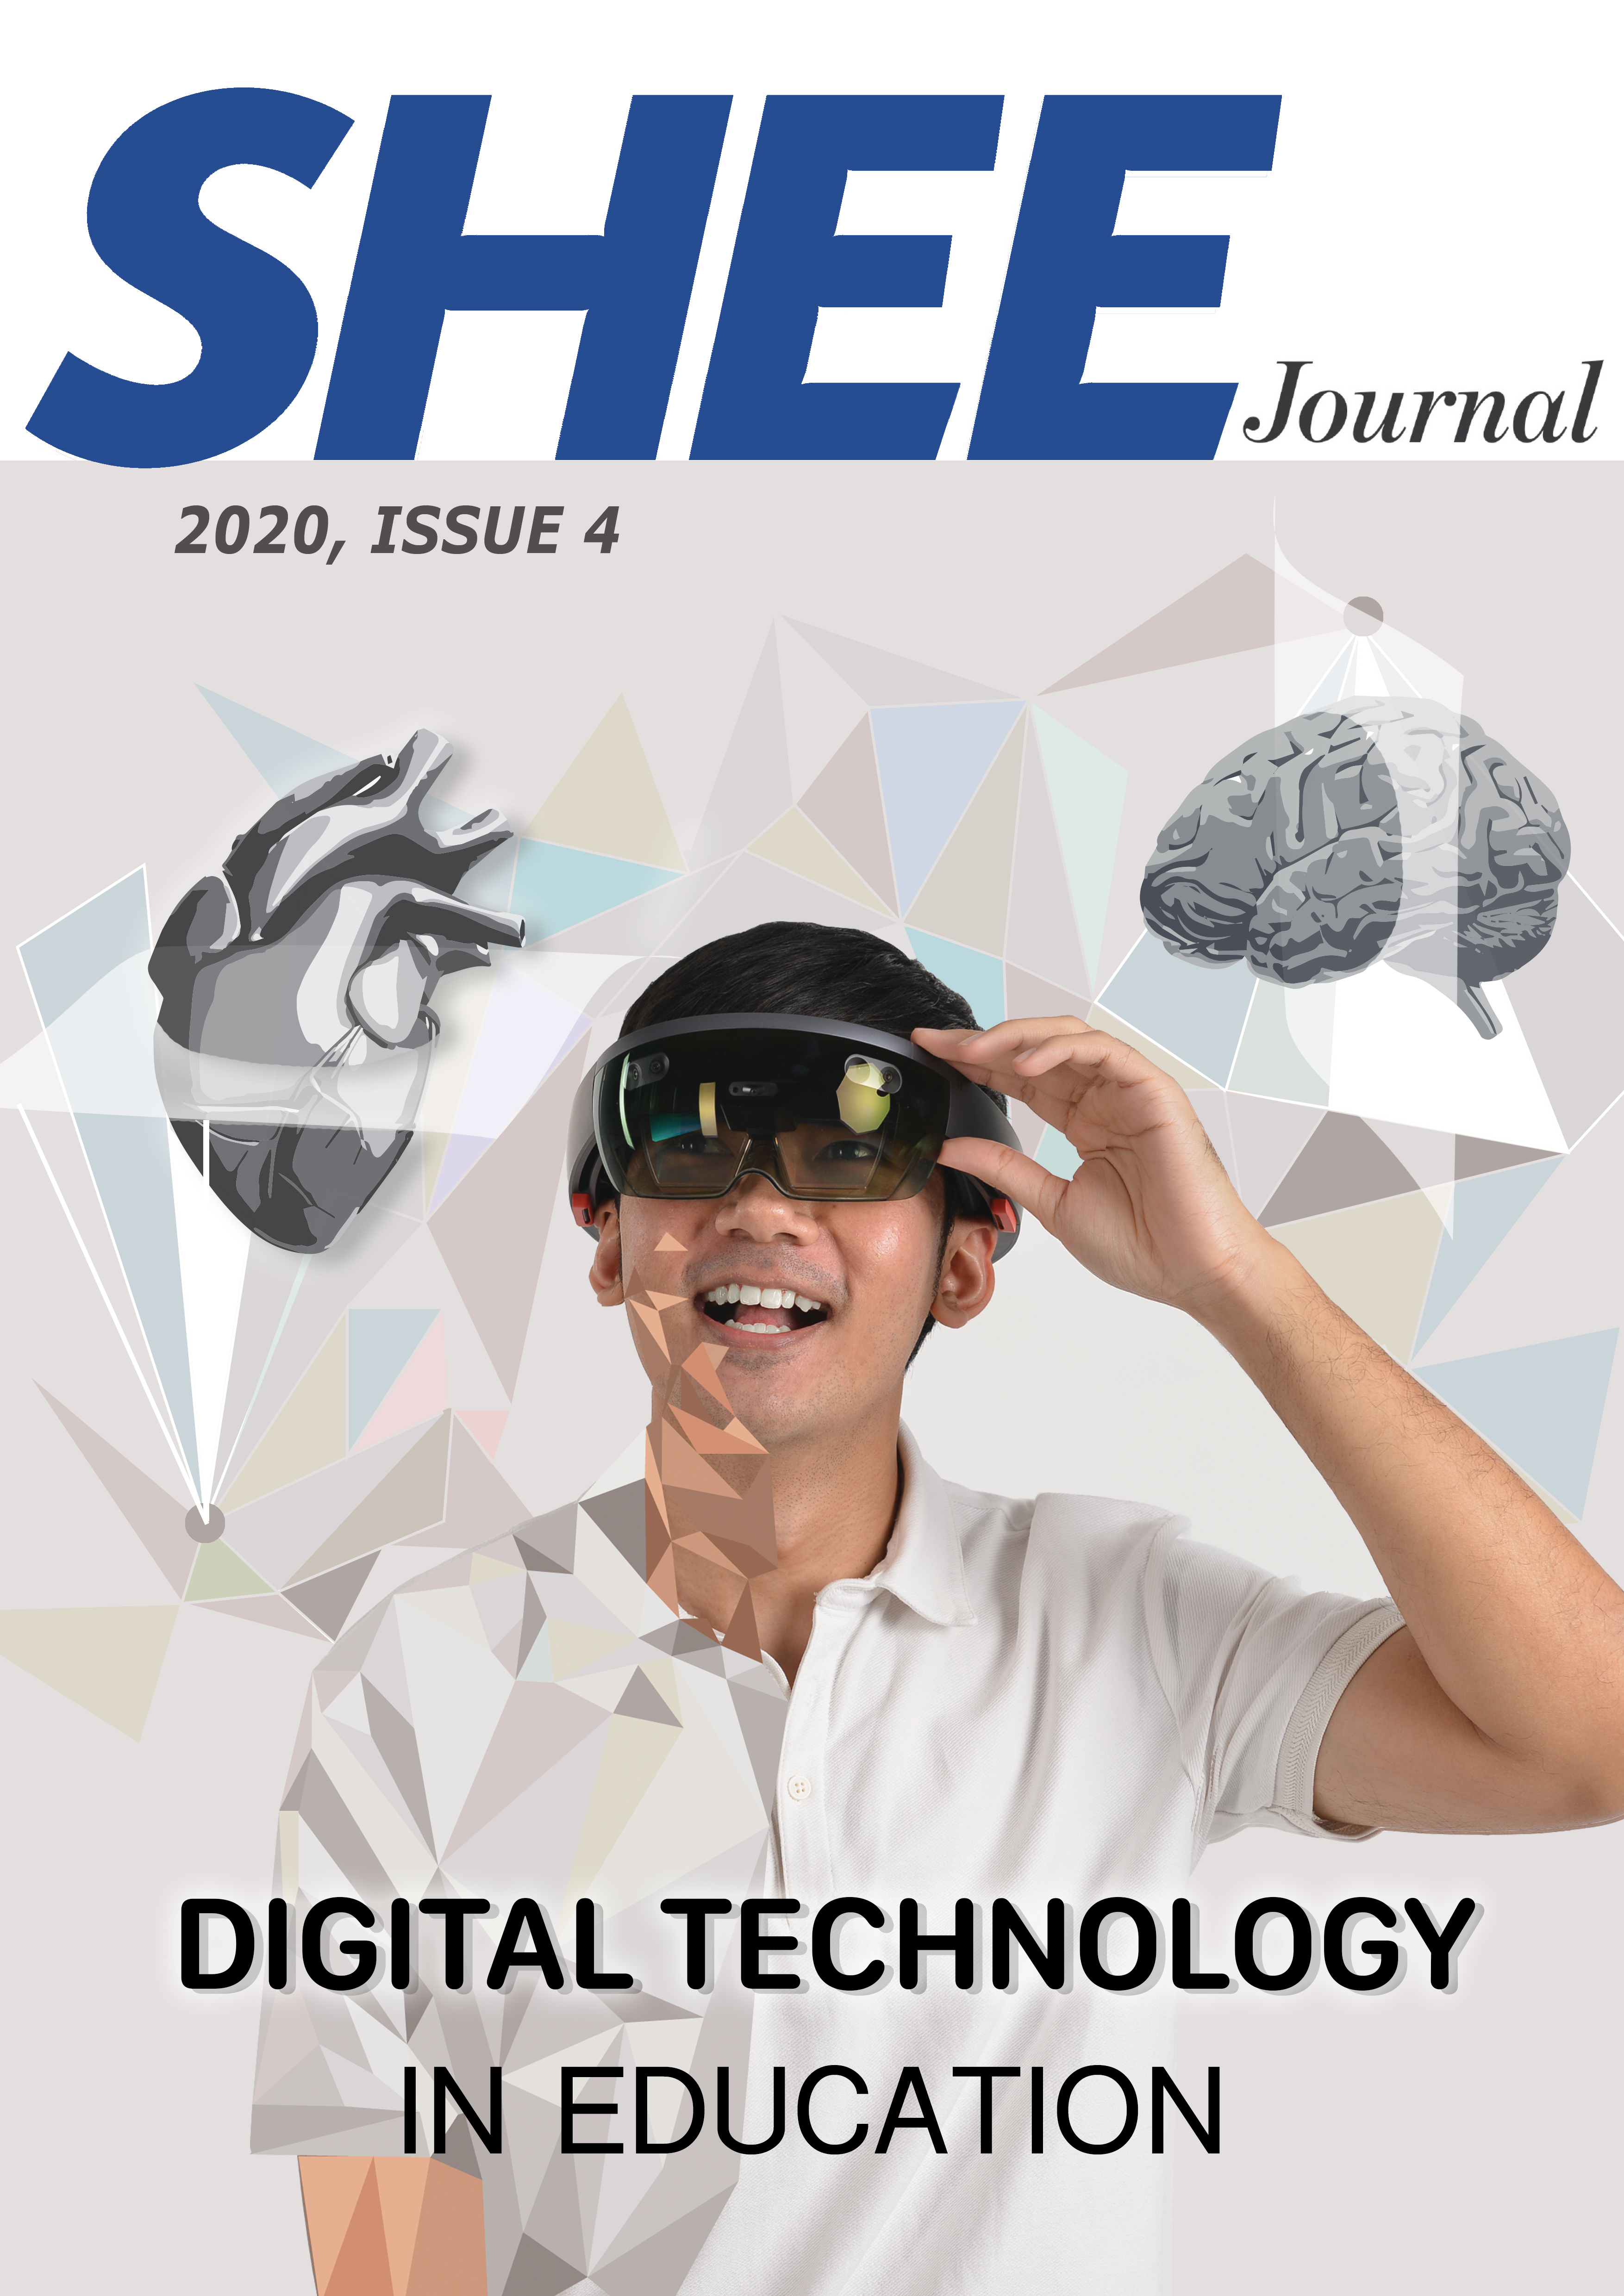 Journal Issue 4, 2020 เรื่อง Digital technology in education